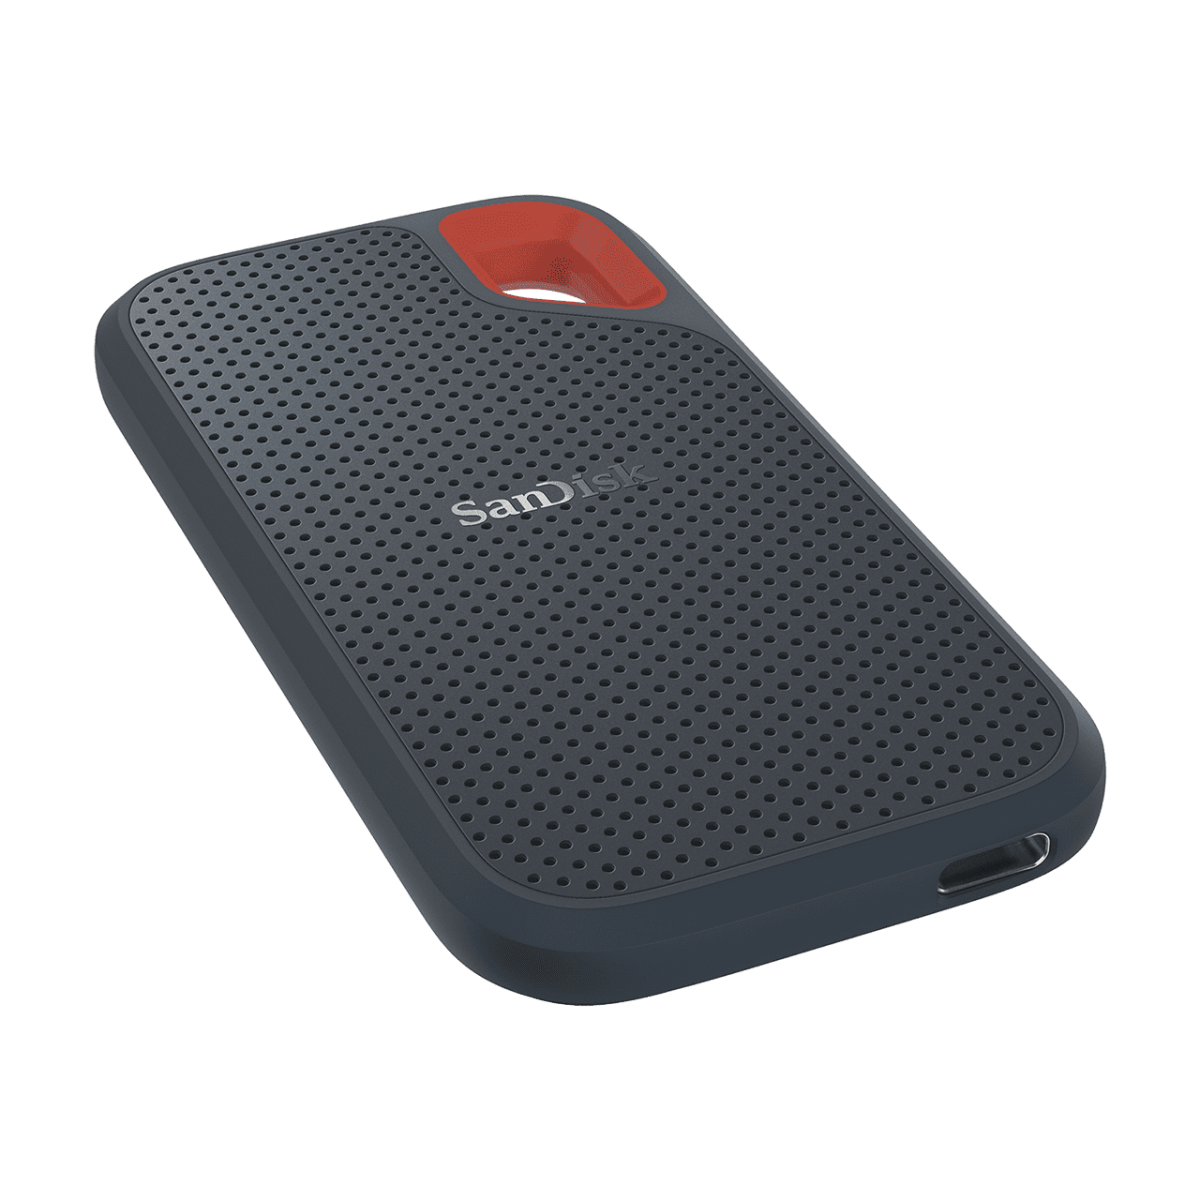 Extreme Usb 3 1 Ssd Flat.png.thumb .1280.1280 Sandisk &Lt;H1&Gt;Speed Up The Flow. Move Files Faster.&Lt;/H1&Gt; &Lt;Div Class=&Quot;Inheritpara Mb-4&Quot;&Gt; The Rugged Sandisk® Extreme Portable Ssd Delivers High-Speed Transfers With Up To 550Mb/S Read Speeds. This Makes It Perfect For Saving And Editing Hi-Res Photos And Videos. With An Ip55 Rating, It Also Stands Up To Rain, Splashes, Spills, And Dust. &Lt;/Div&Gt; &Lt;Strong&Gt;3-Year Sandisk Limited Warranty&Lt;/Strong&Gt; [Embed]Https://Youtu.be/On0B70Waom8[/Embed] Sandisk Extreme Portable Ssd 1 Tb (Rain, Splashes, Spills, And Dust Resistance)